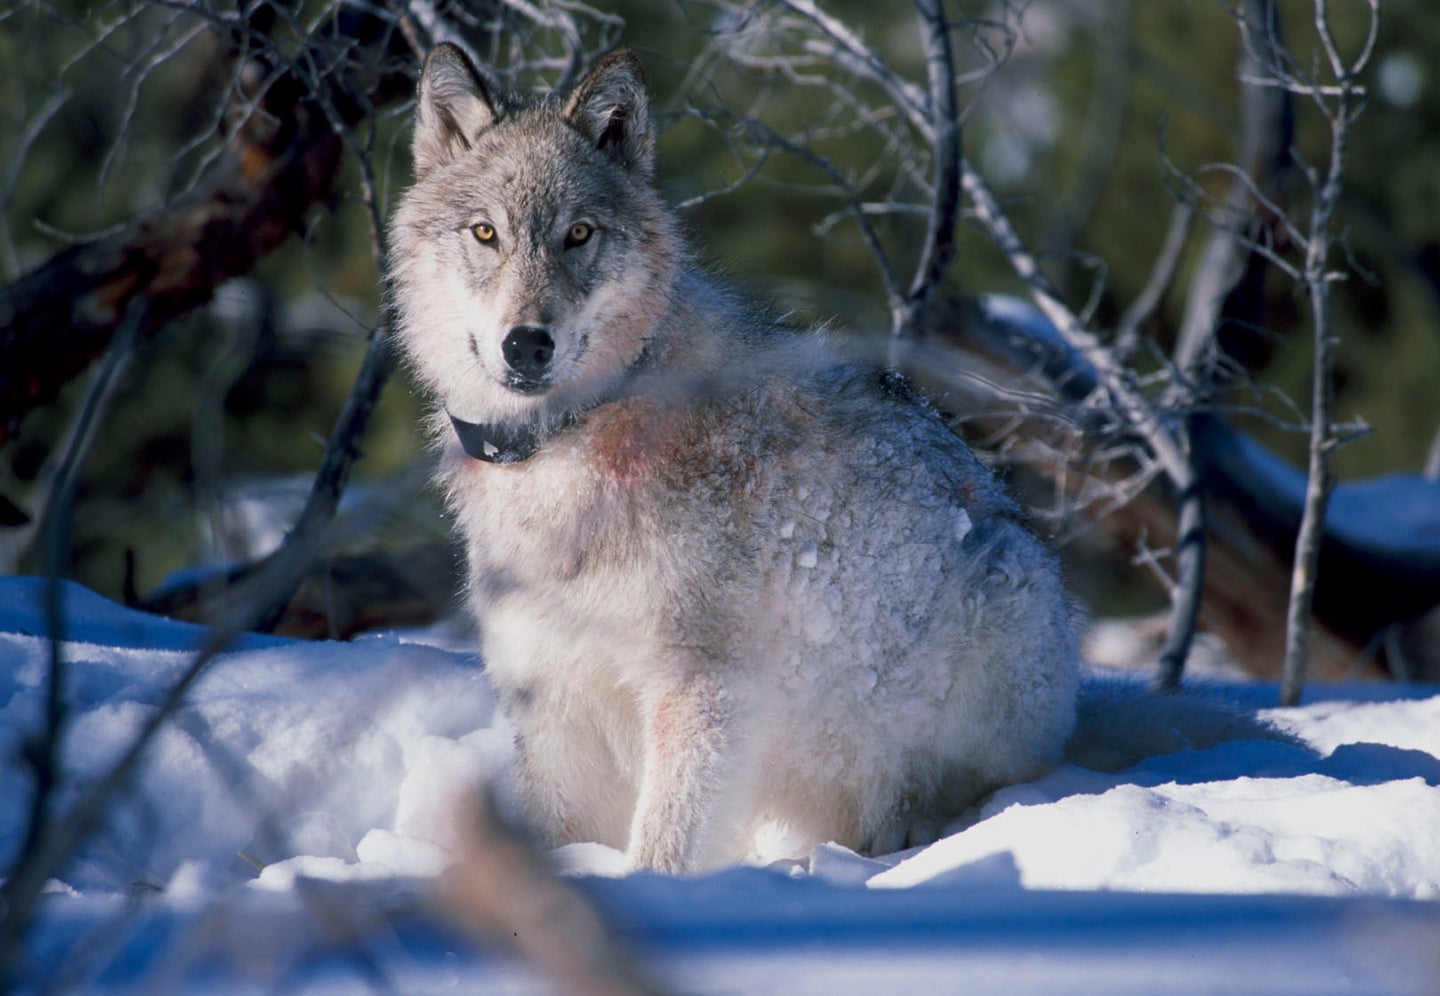 Wolf03-A 130 pound wolf watches biologists in Yellowstone National Park after being captured and fitted with a radio collar on 1-9-03.